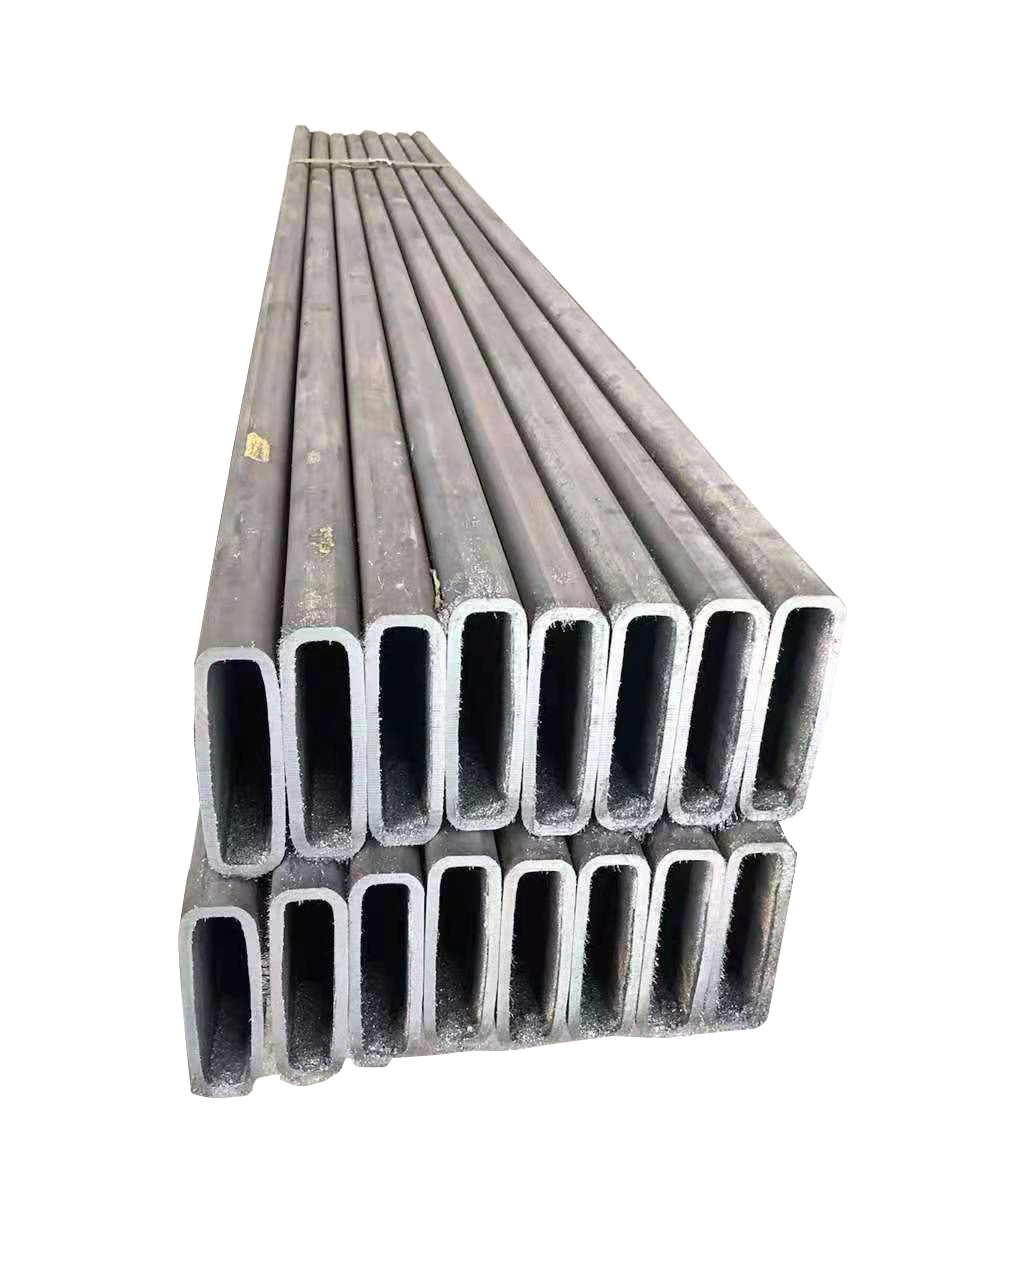 GI MS Steel Tubes Square Hollow Sections Galvanized Square Box Sections